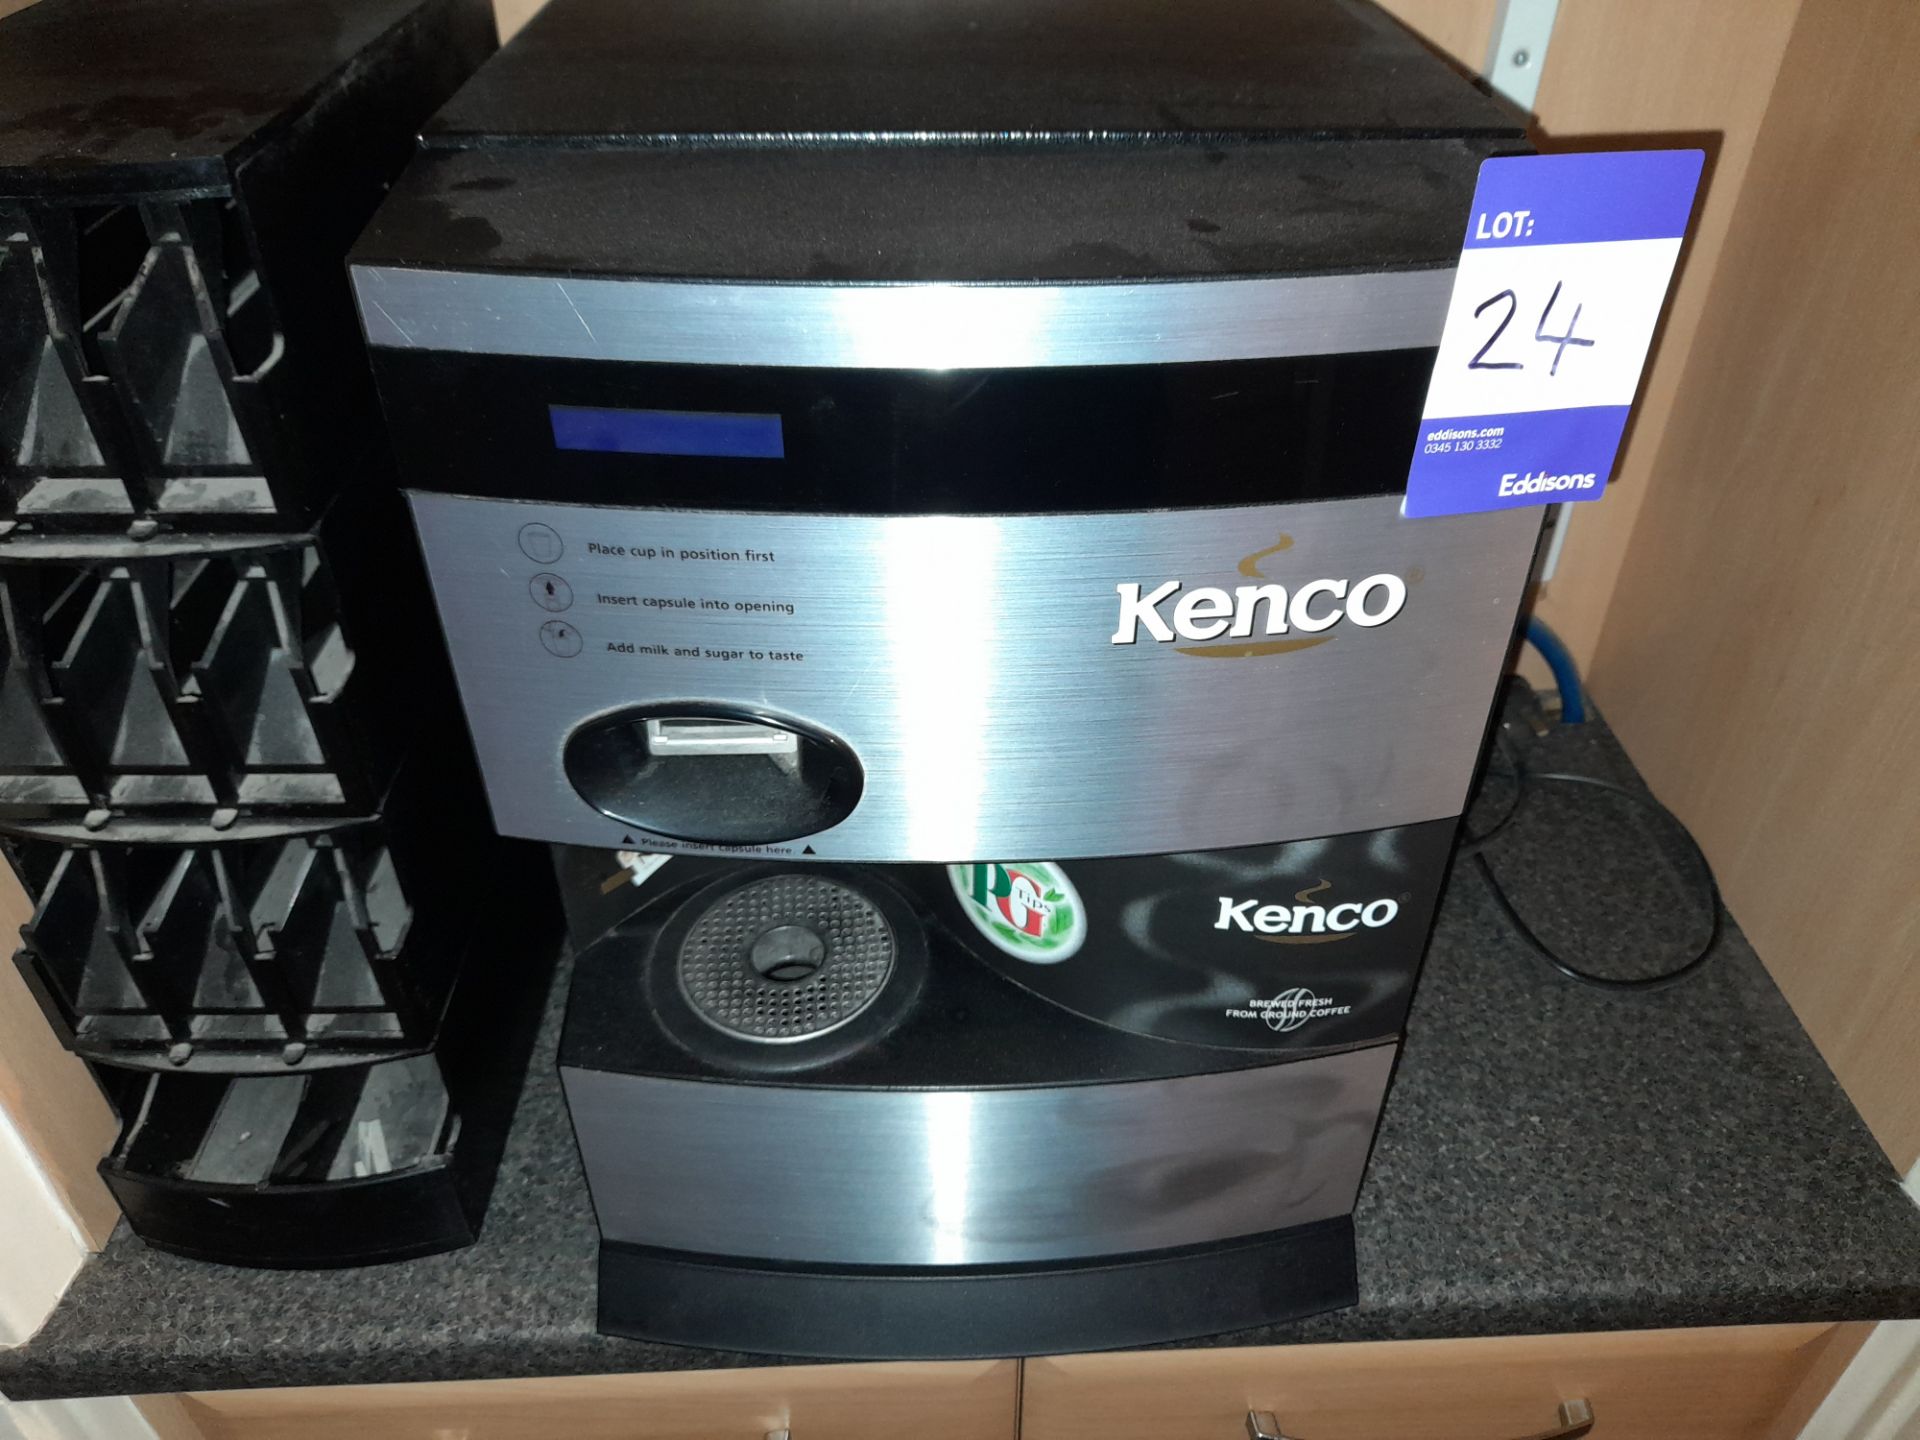 Kenco branded hot drinks machine (purchasers responsibility to disconnect plumbing)